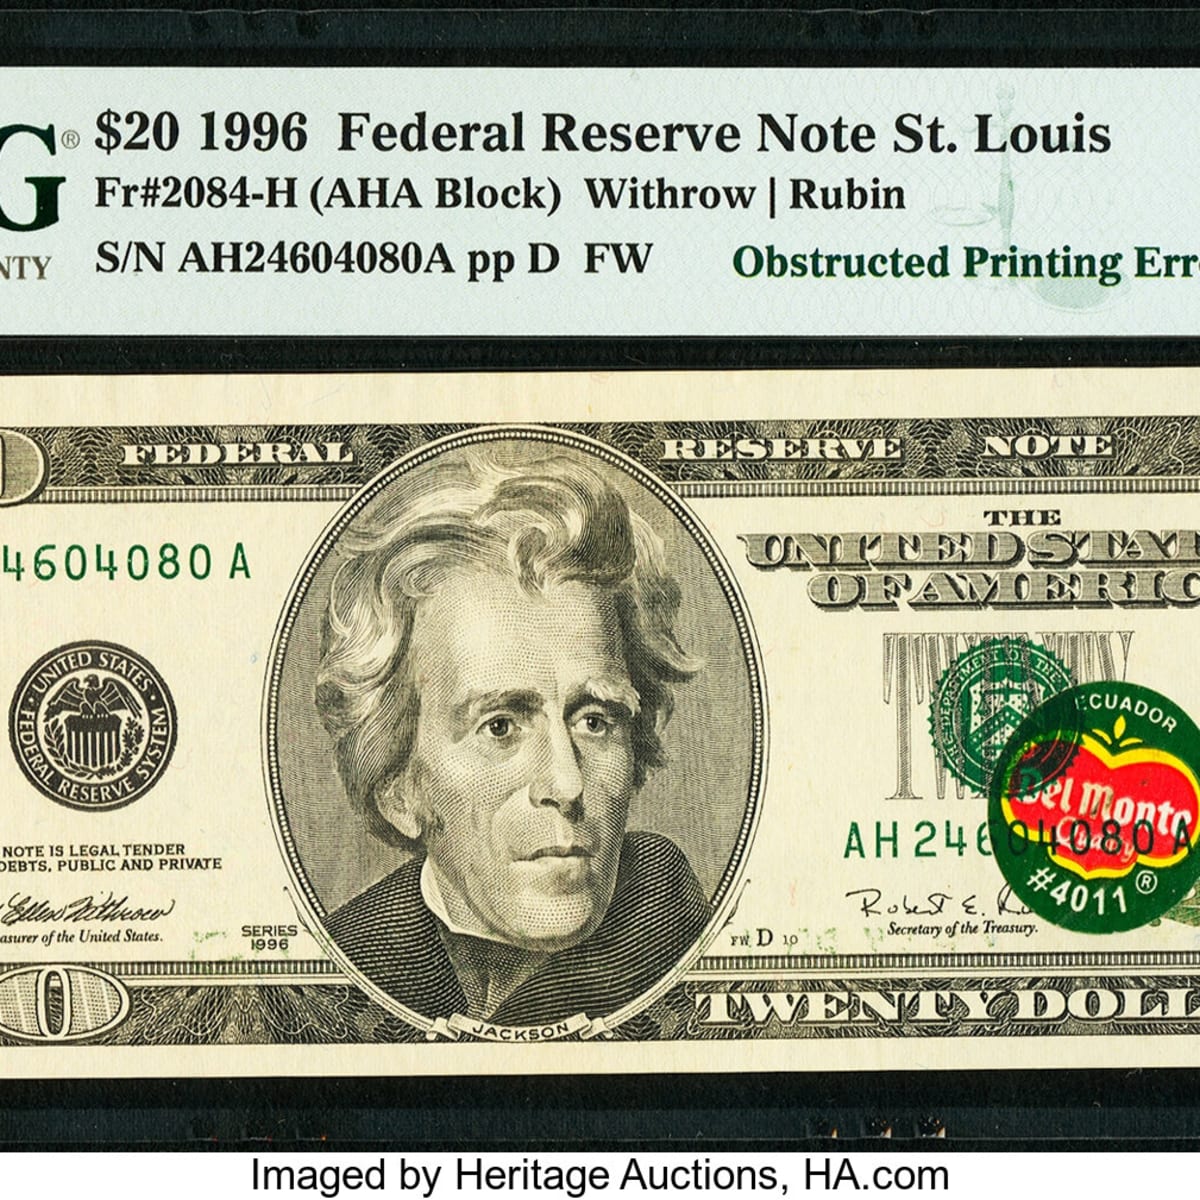 Unique New Jersey $3 Bank Note Surfaces From Fabled S.S. Central America  Sunken Treasure - Numismatic News